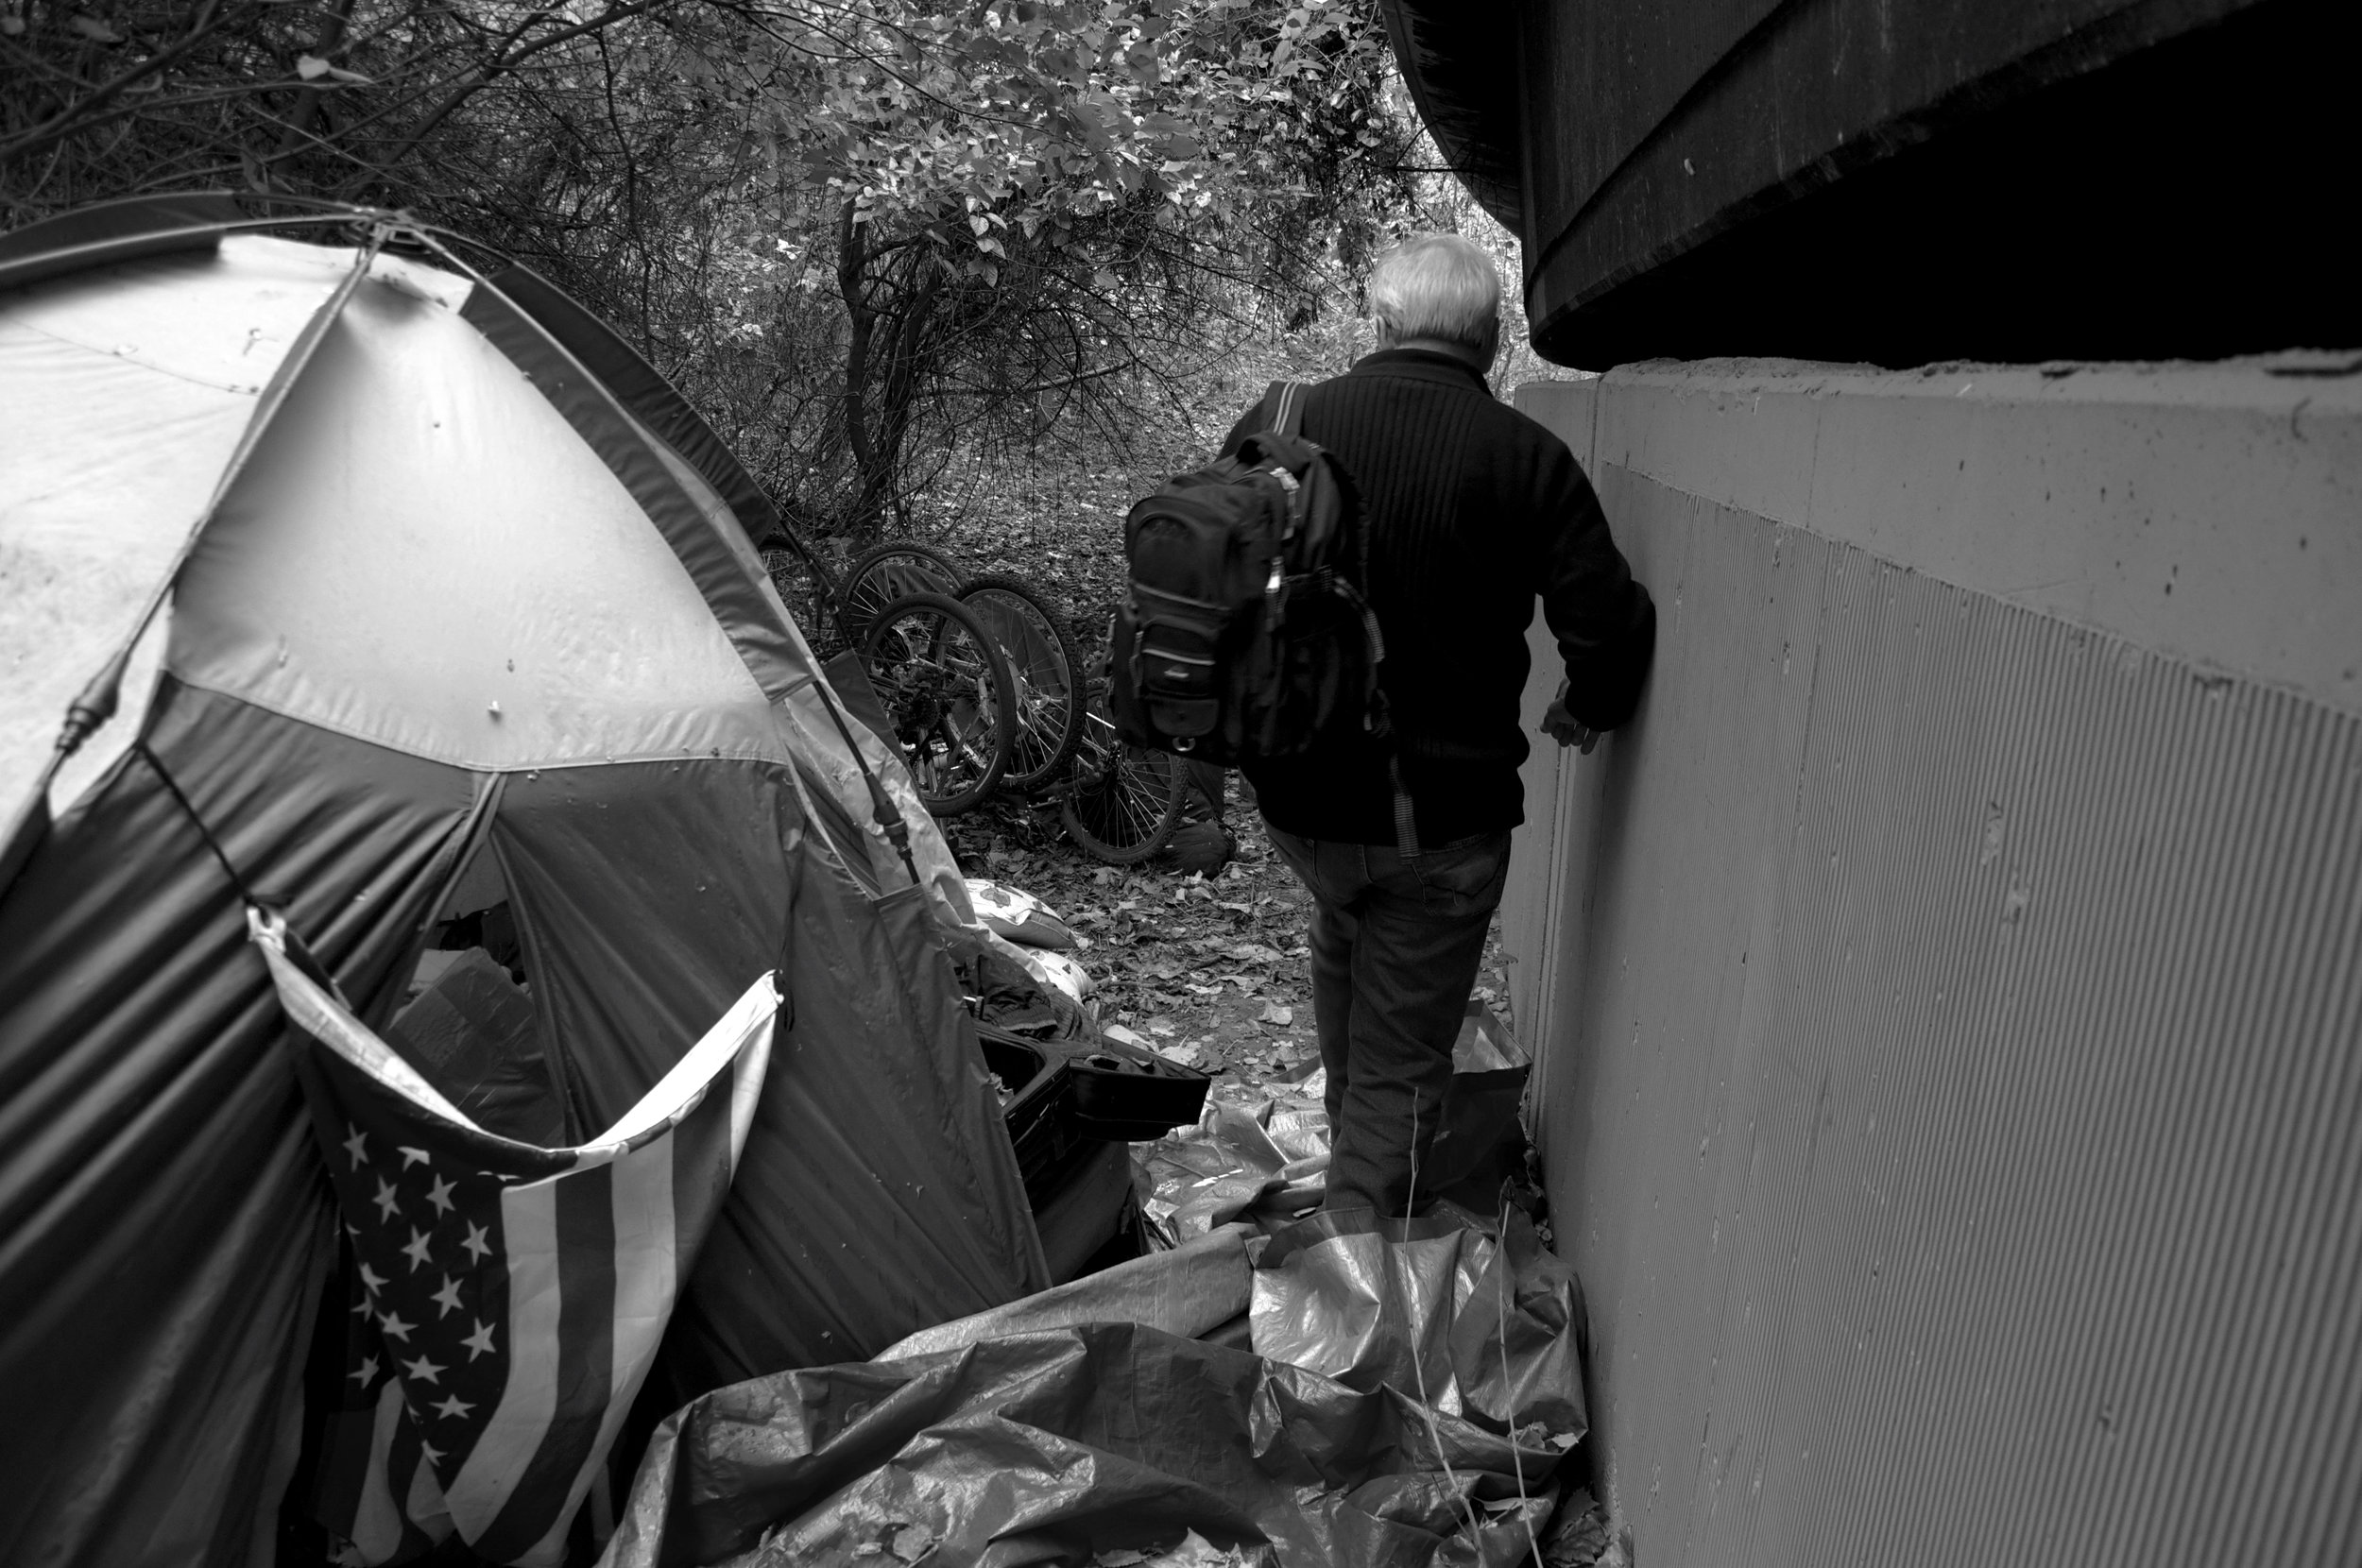  Cliff and Melanie, a homeless couple living underneath the freeway, are nowhere to be found, so Dr. Anthony Martinez continues his search for the couple. No one is in the tent and there is hardly a trace of activity. 